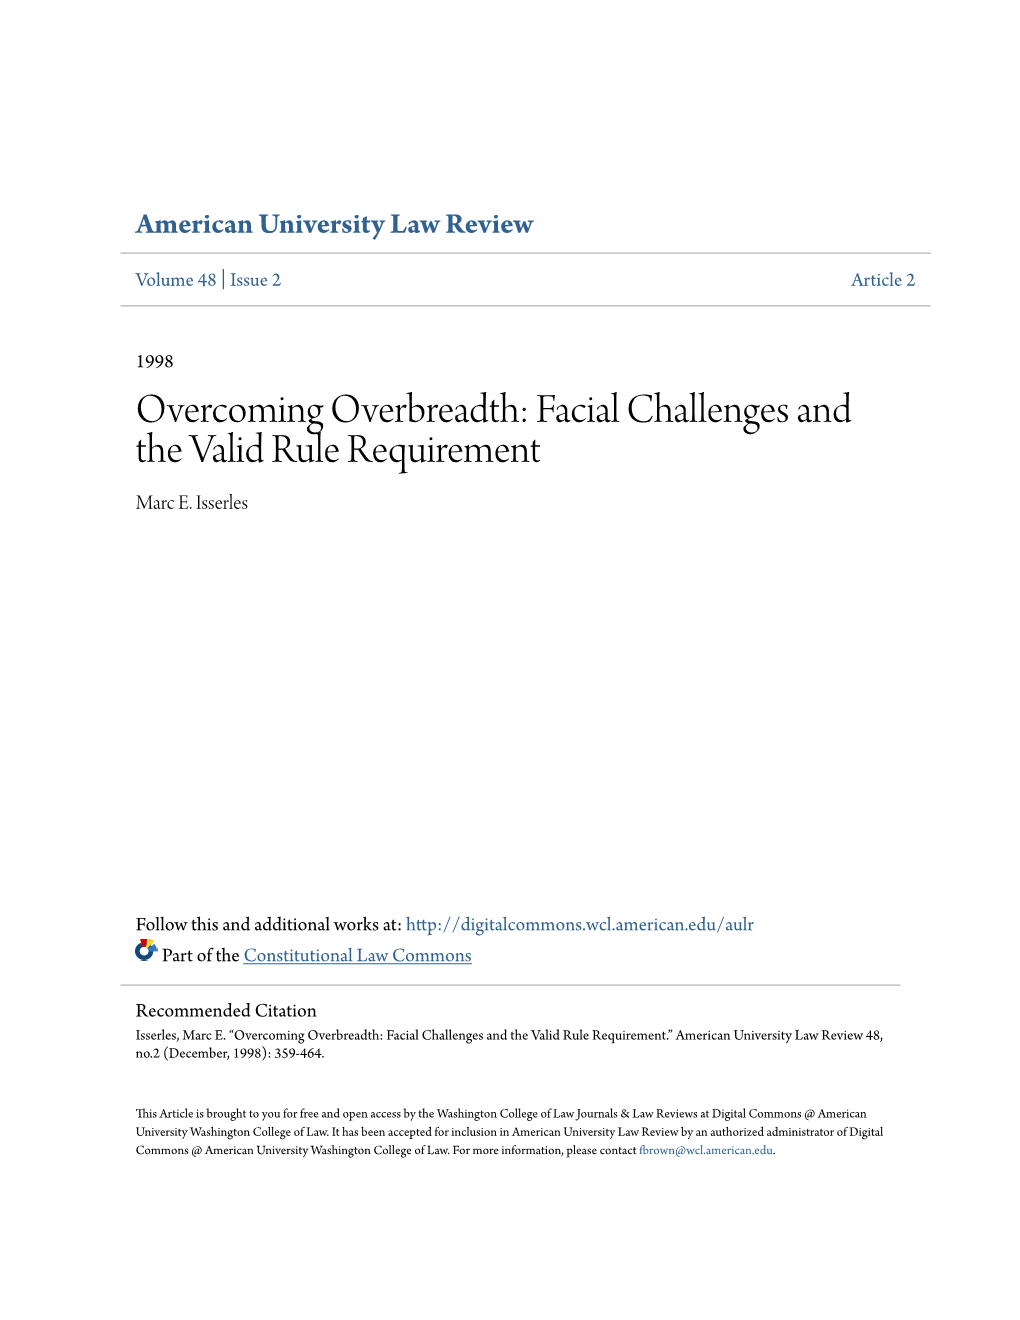 Overcoming Overbreadth: Facial Challenges and the Valid Rule Requirement Marc E